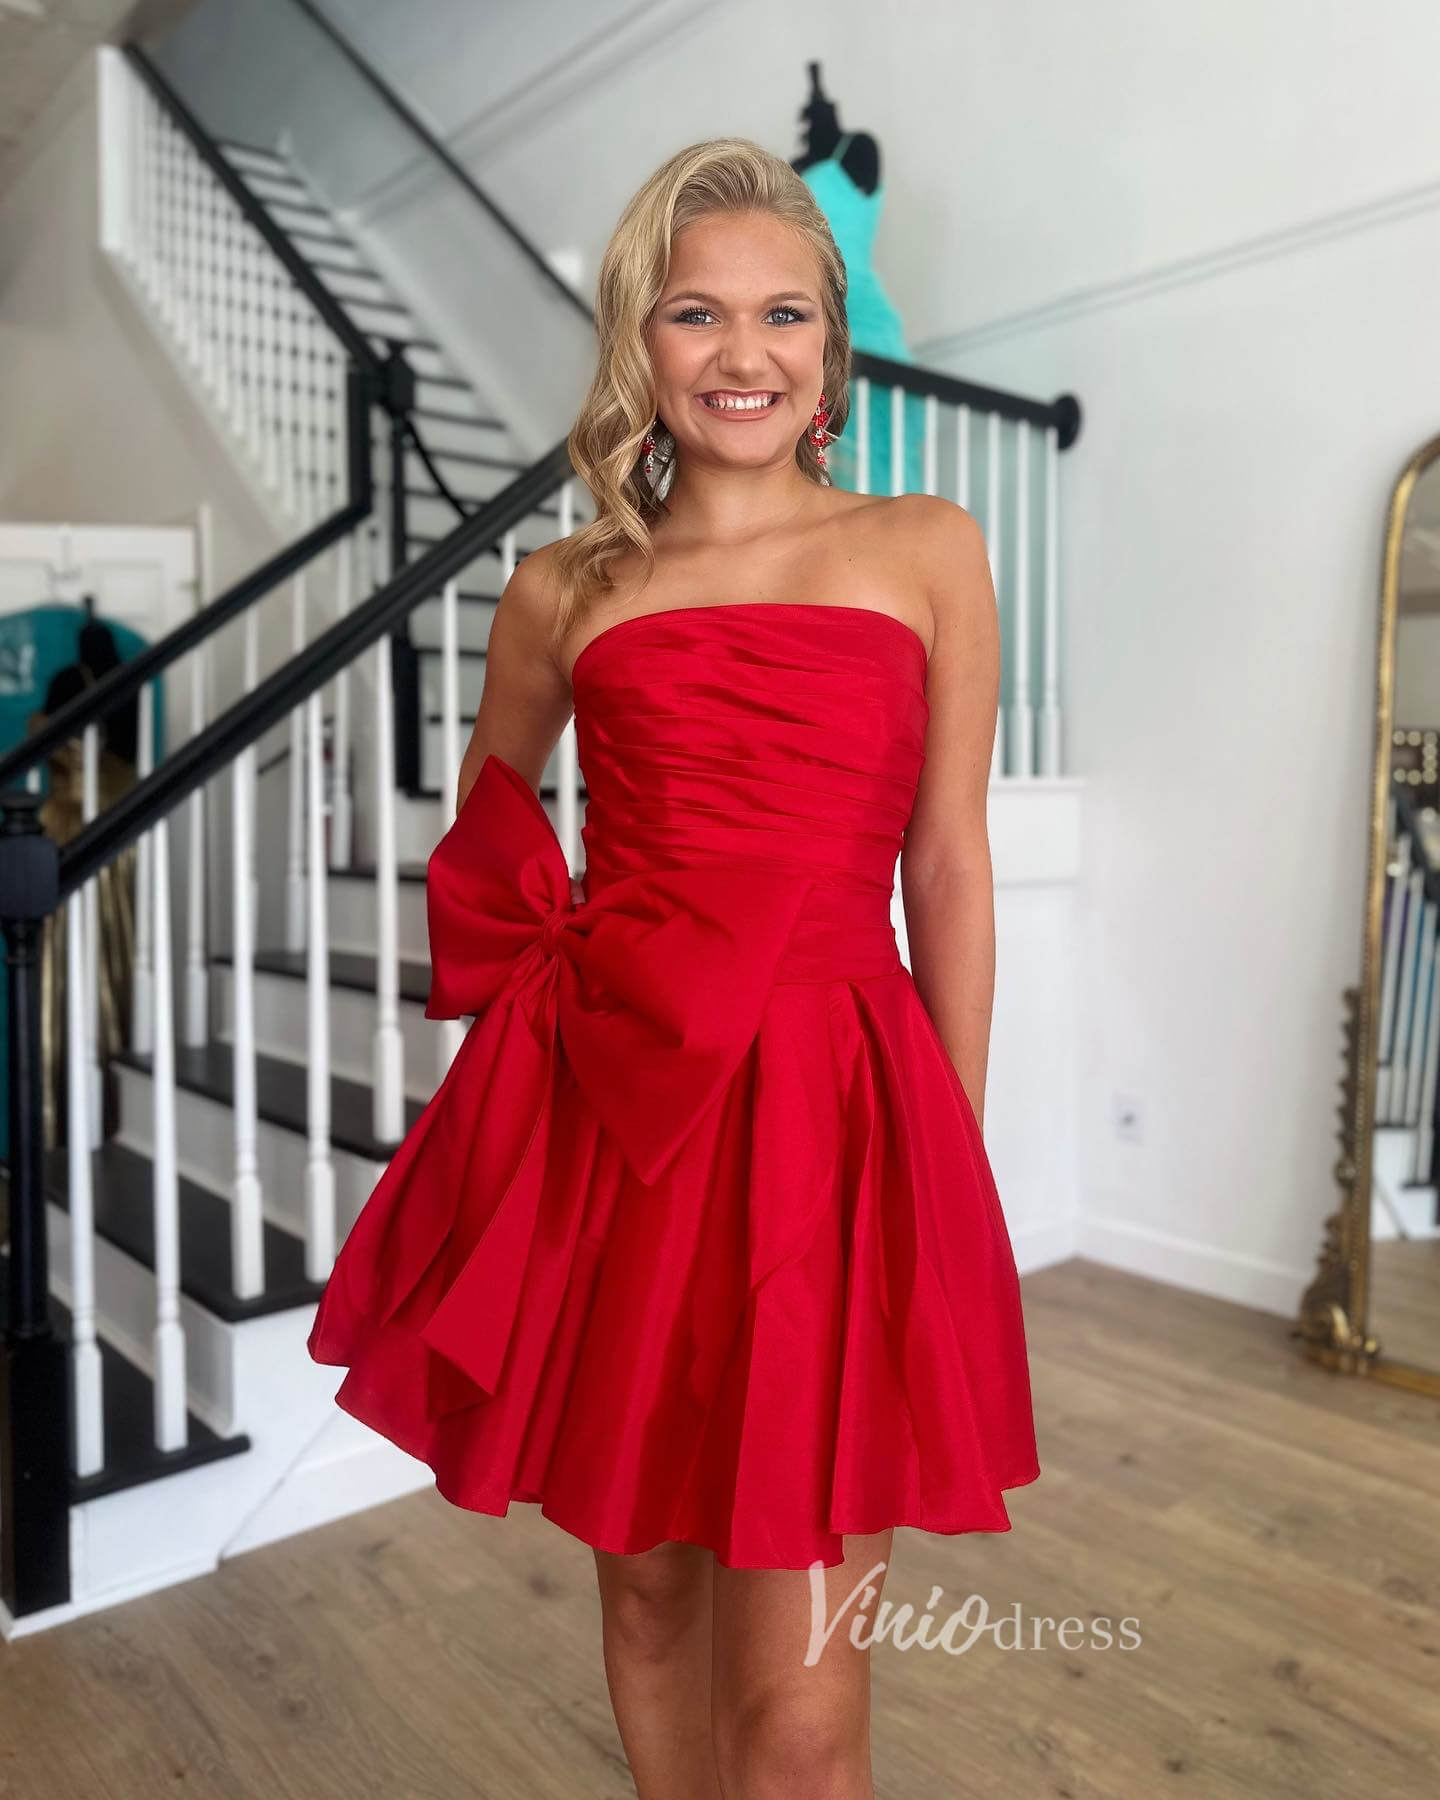 Red Strapless Satin Homecoming Dresses Bow-Tie Short Prom Dress SD1640-prom dresses-Viniodress-Red-Custom Size-Viniodress